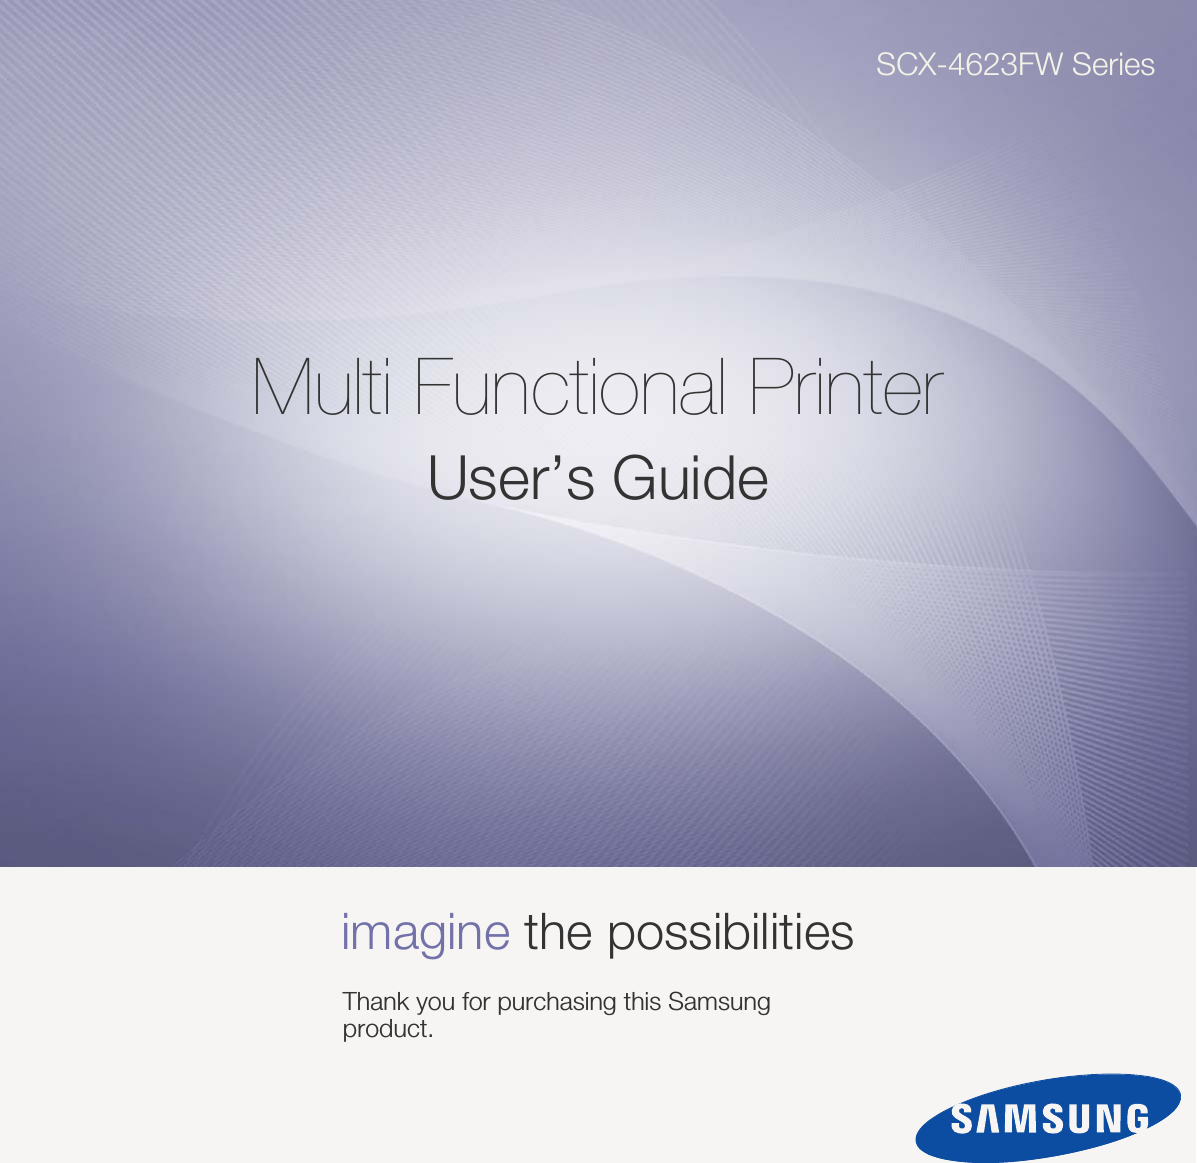 SCX-4623FW SeriesMulti Functional PrinterUser’s Guideimagine the possibilitiesThank you for purchasing this Samsung product.